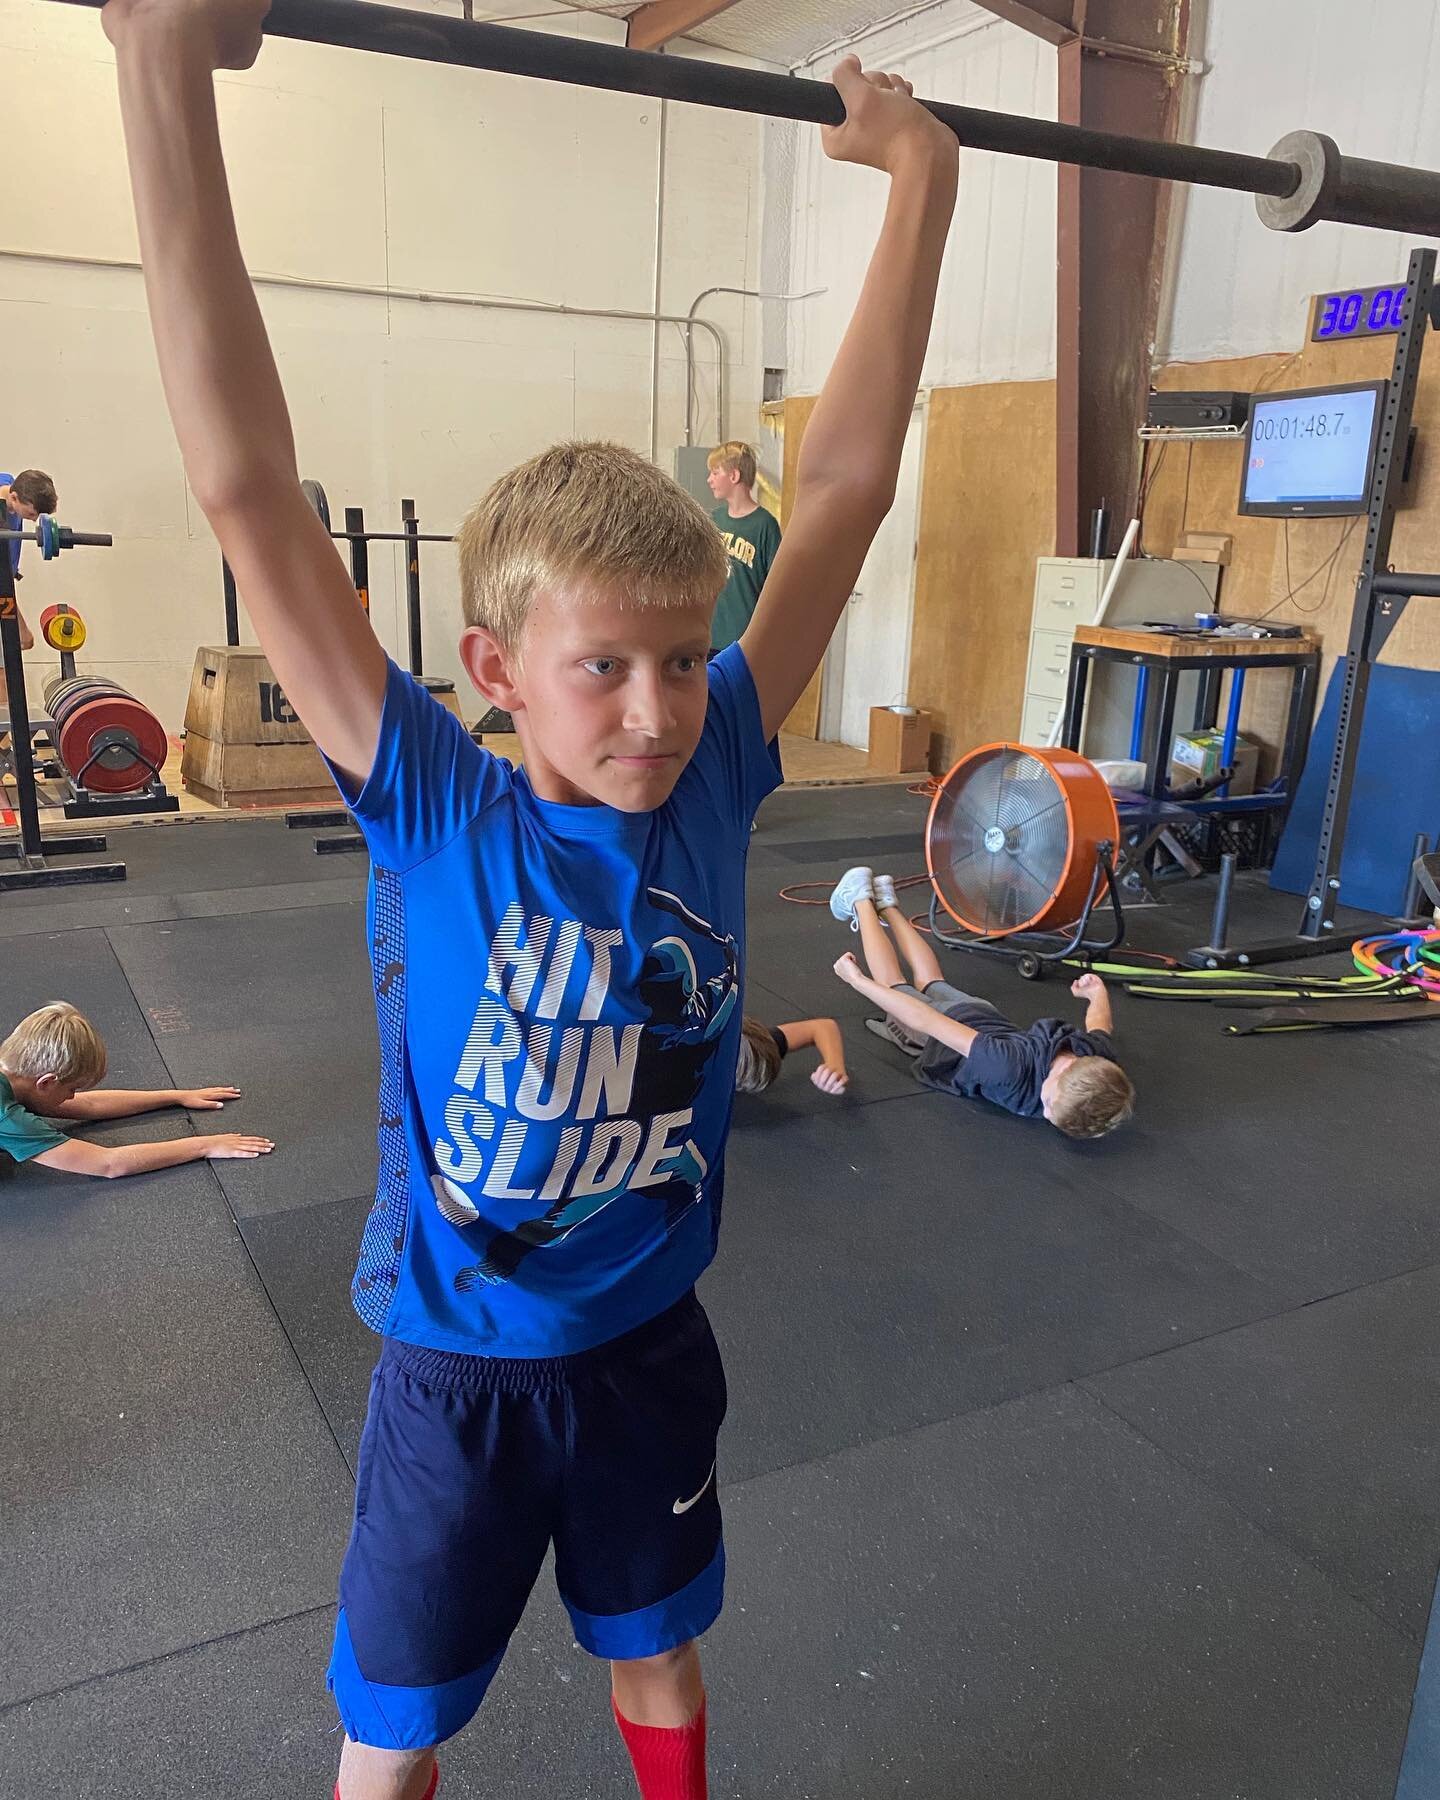 Just a few short weeks until our summer youth programs begin! We&rsquo;d love for your elementary or middle schooler join us this year! 

All punch card system, so purchase only how many sessions they&rsquo;ll use! Elementary meets Tuesday and Thursd